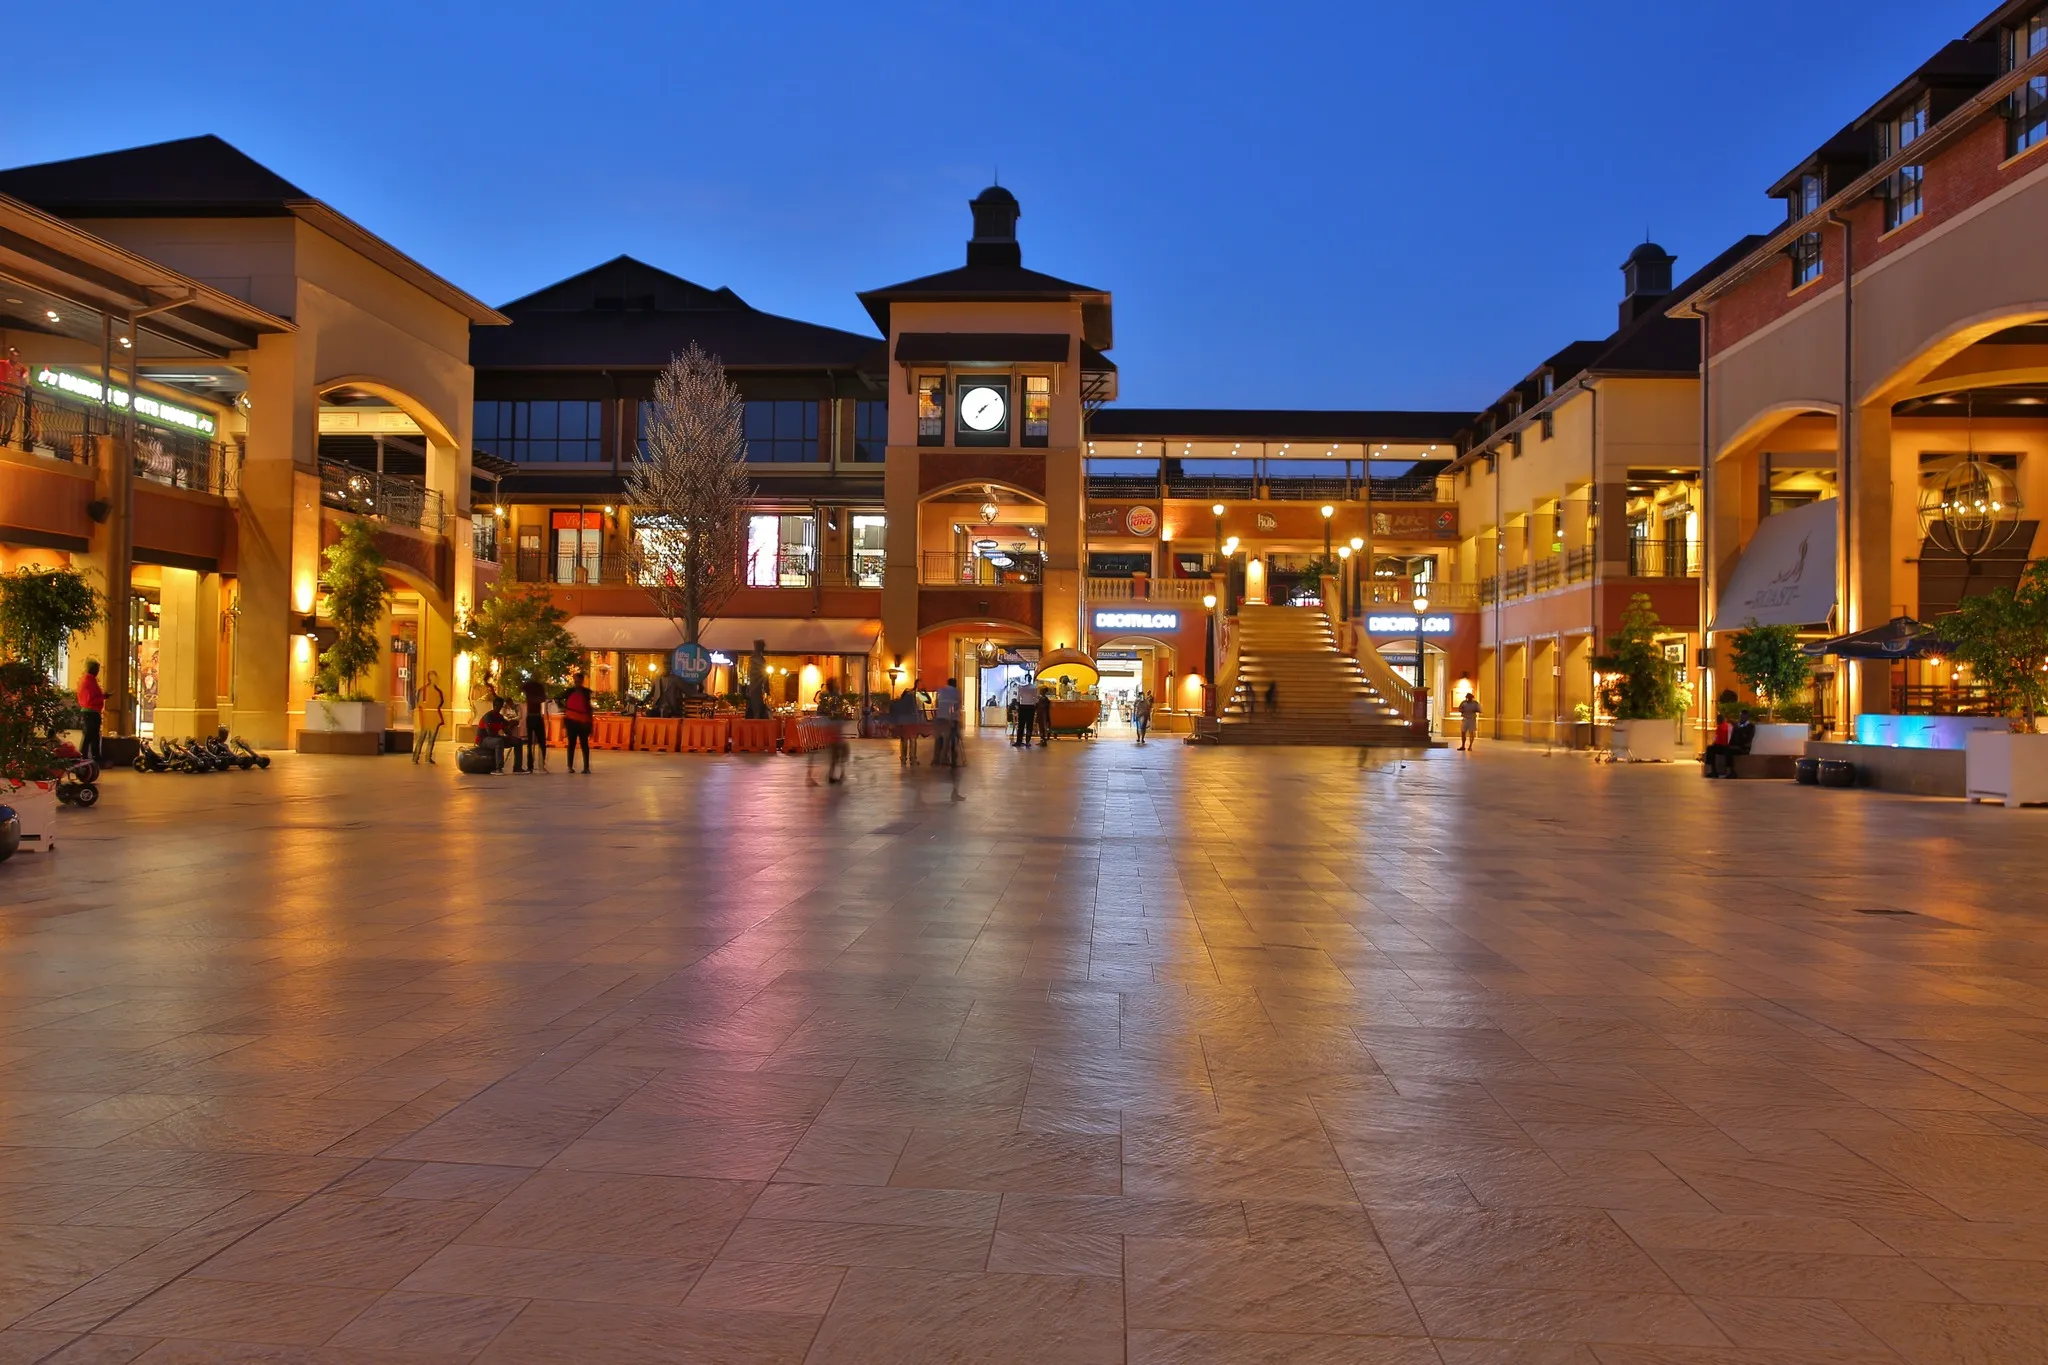 The Hub Karen Mall in Kenya, africa | Handbags,Shoes,Clothes,Watches,Travel Bags,Jewelry,Swimwear - Country Helper